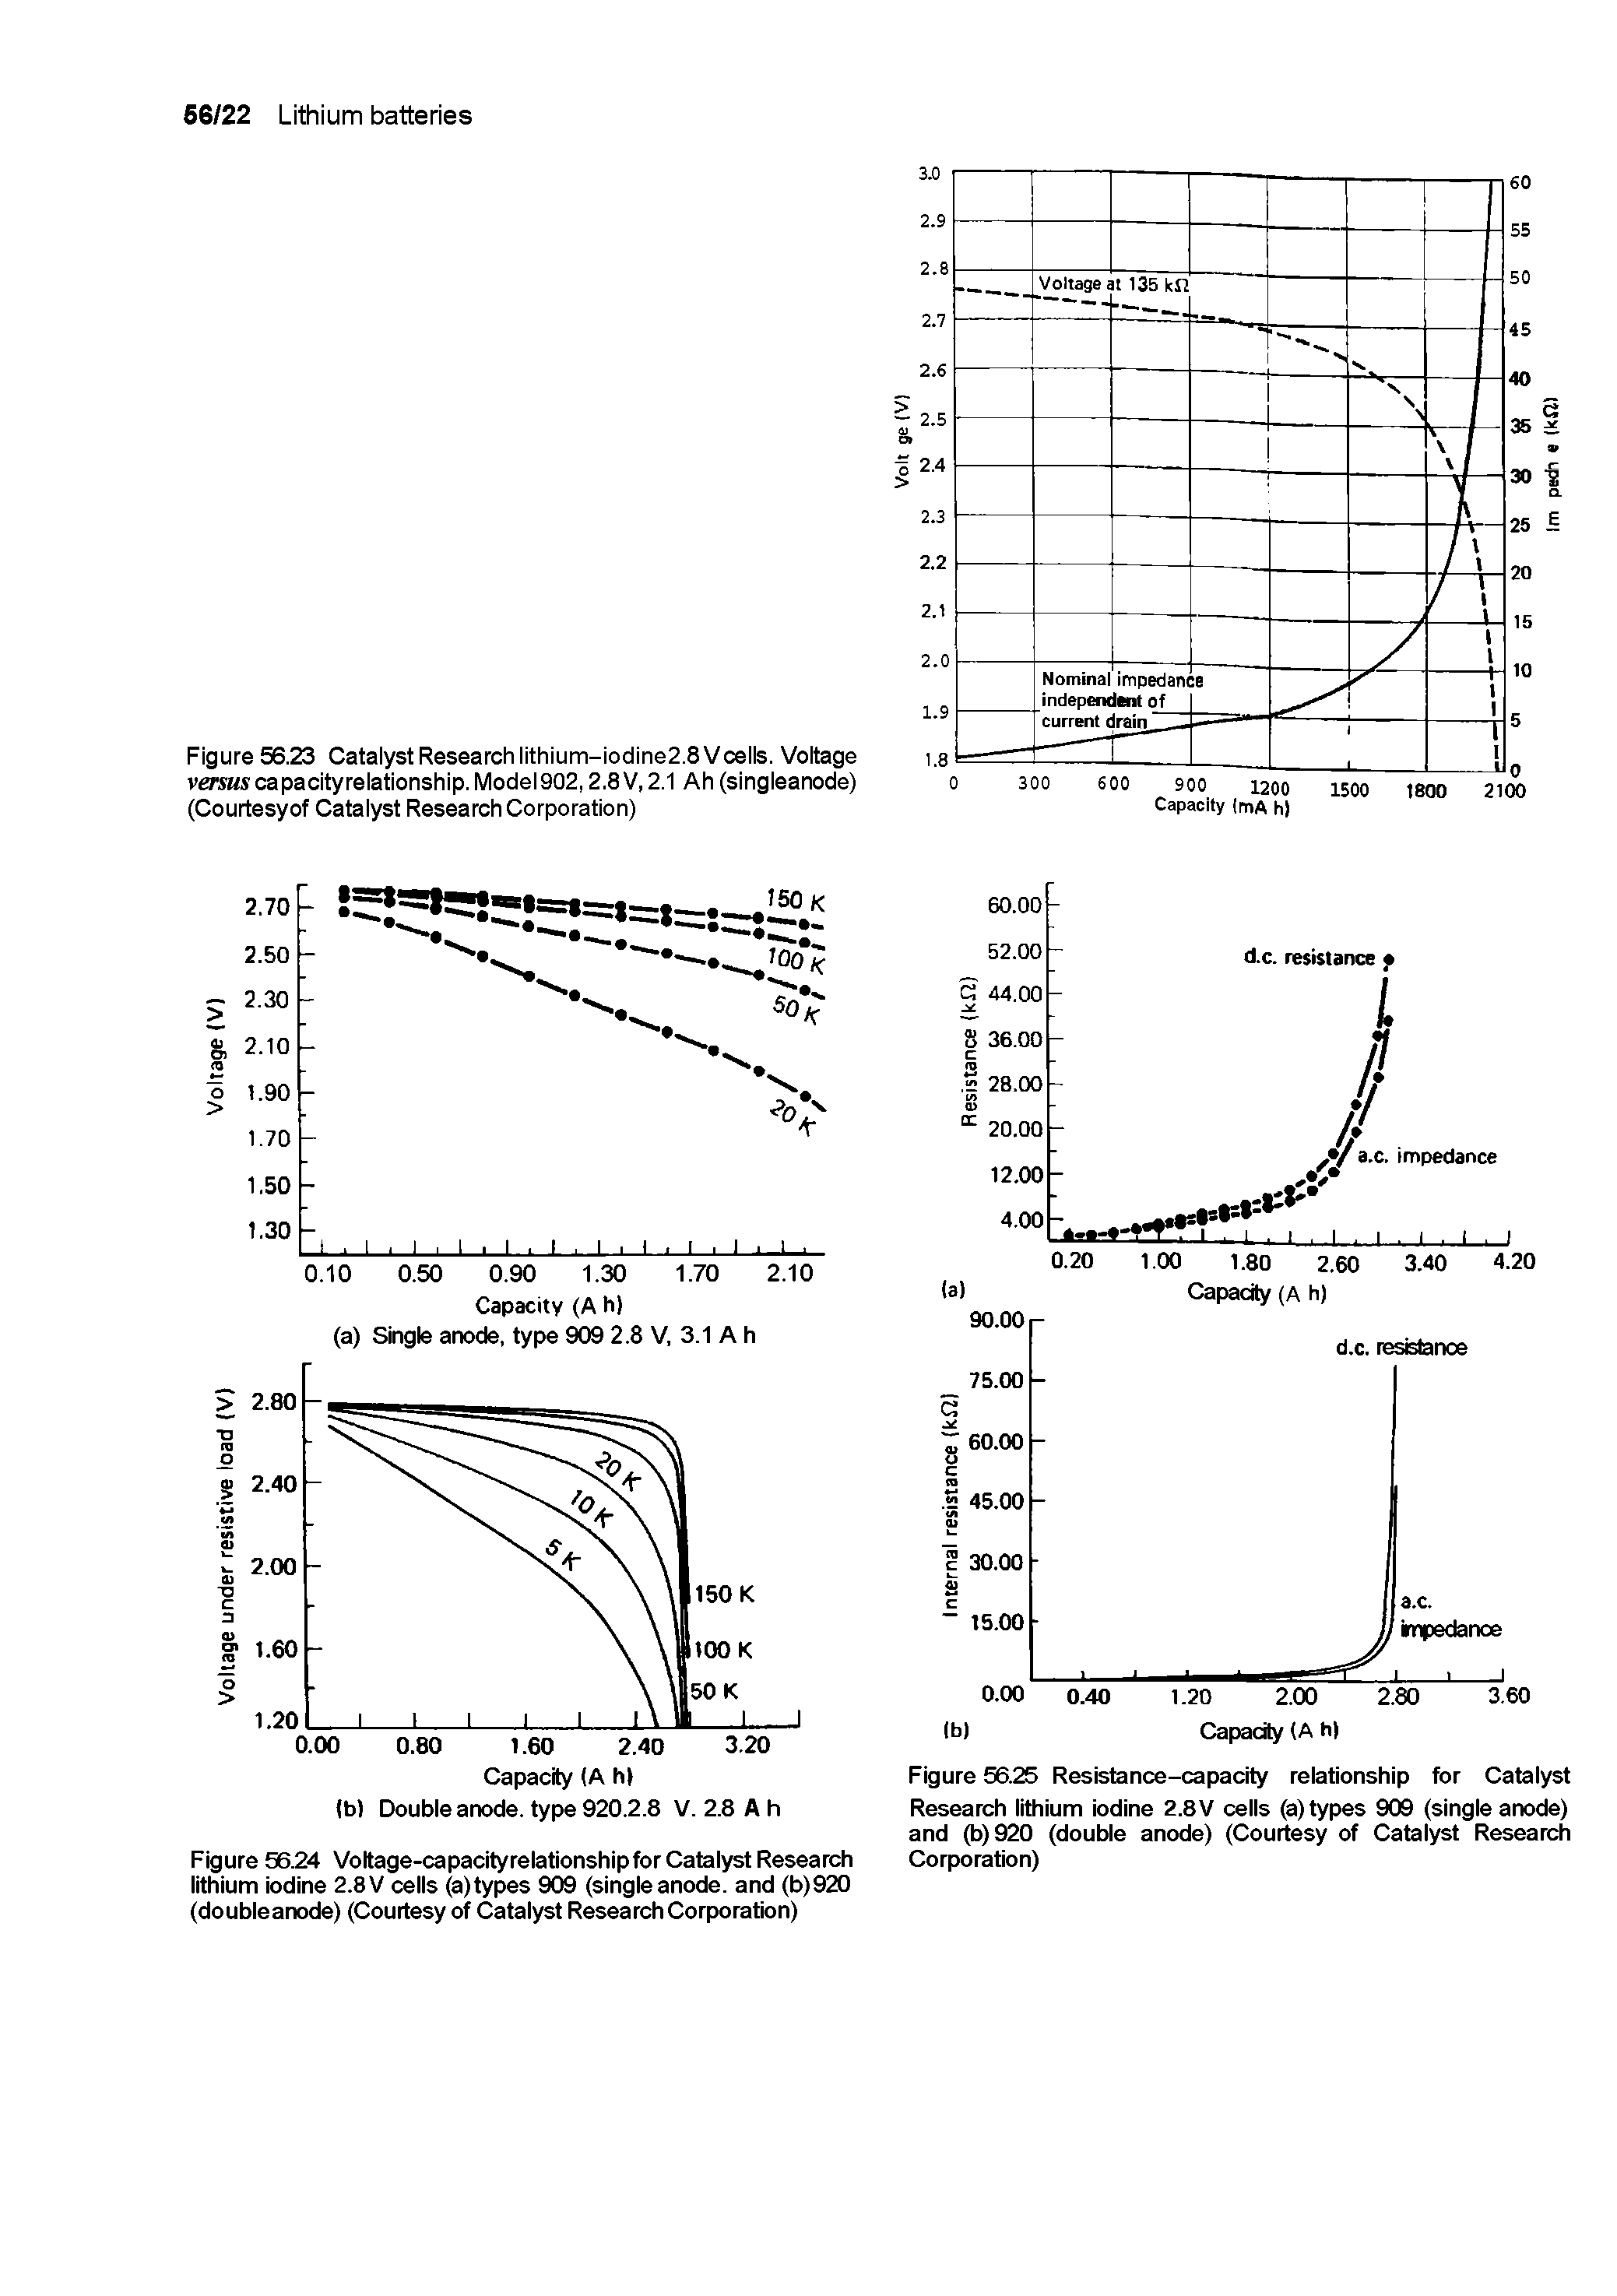 Figure 56.24 Voltage-capacityrelationshipfor Catalyst Research lithium iodine 2.8V cells (a)ty s 909 (single anode, and (b)920 (doubleanode) (Courtesy of Catalyst Research Corporation)...